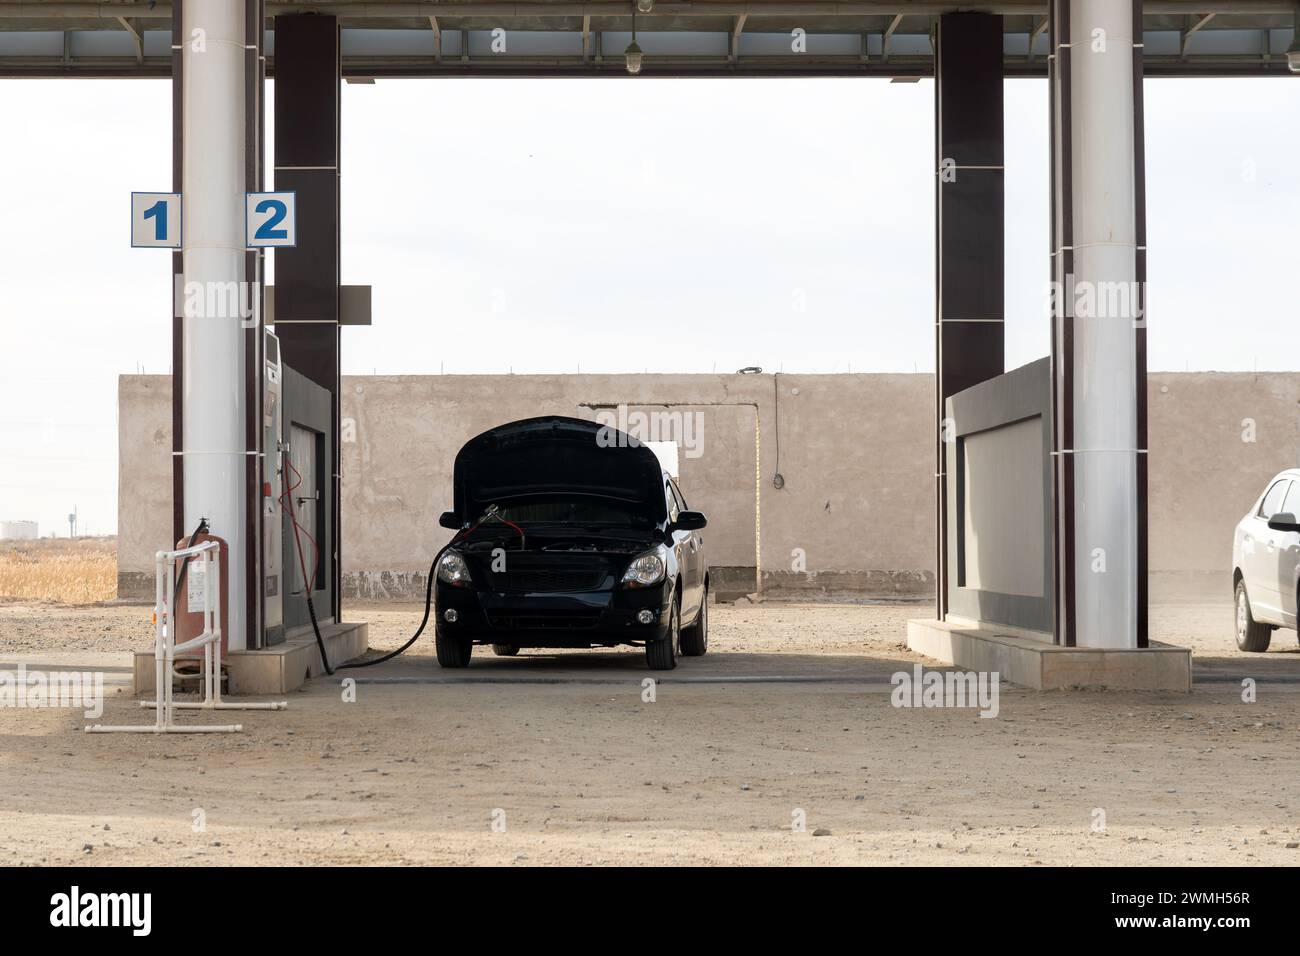 Gas station for methane. The car is refueled with gas on the street. Stock Photo